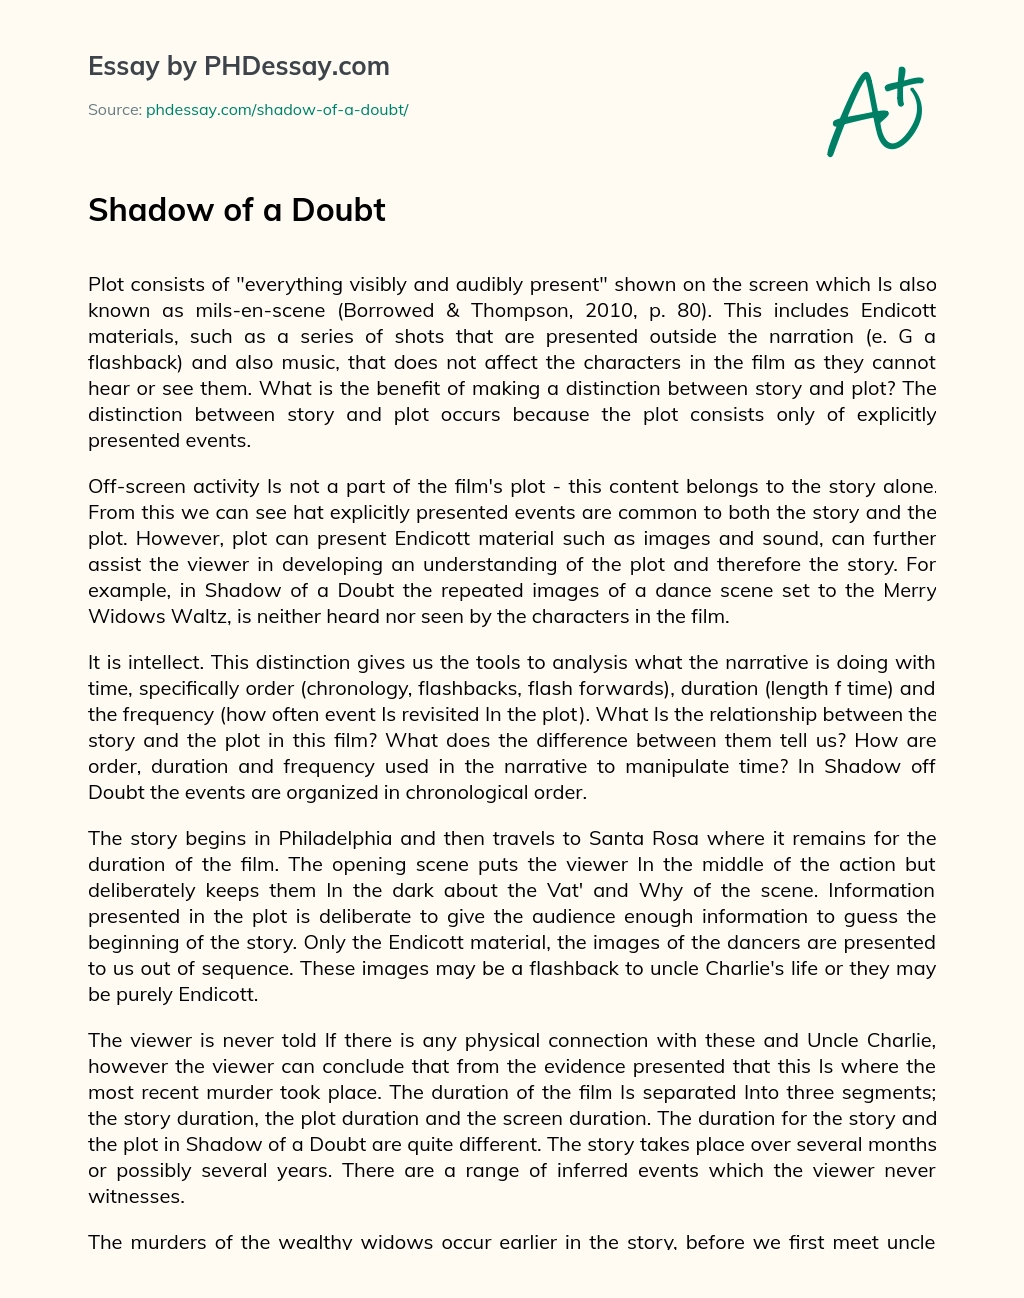 Shadow of a Doubt essay